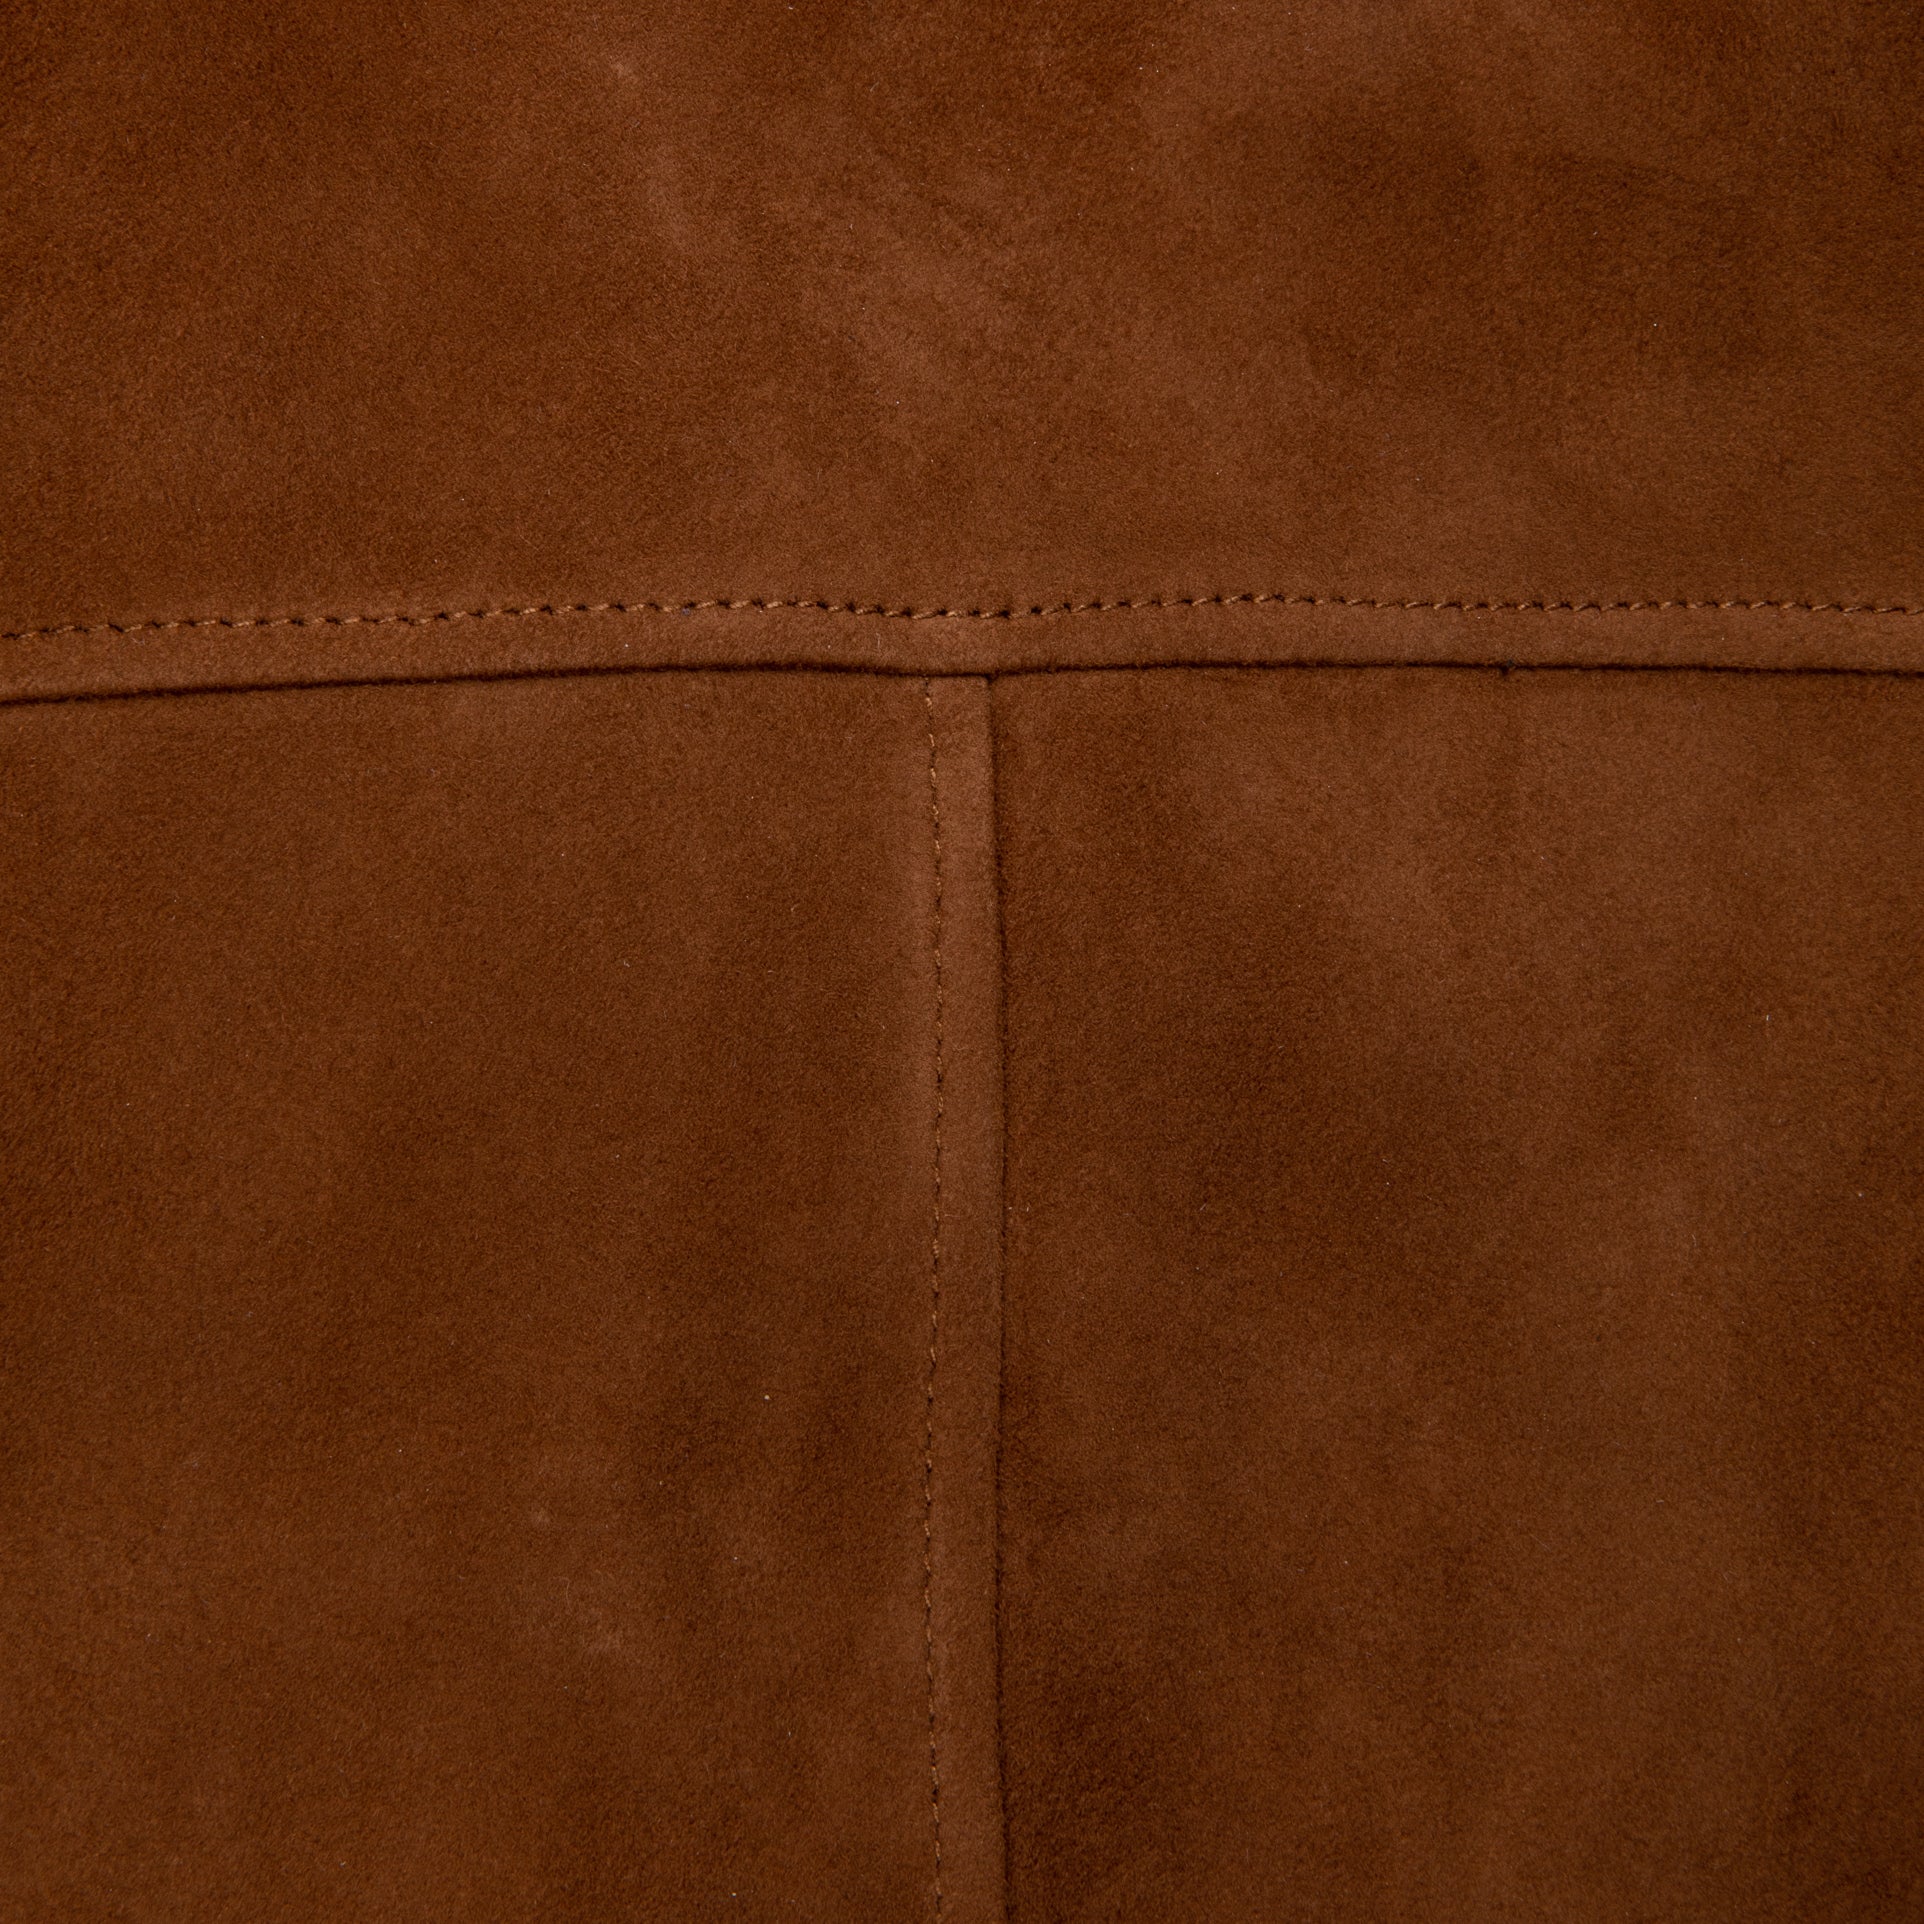 Suede paneling